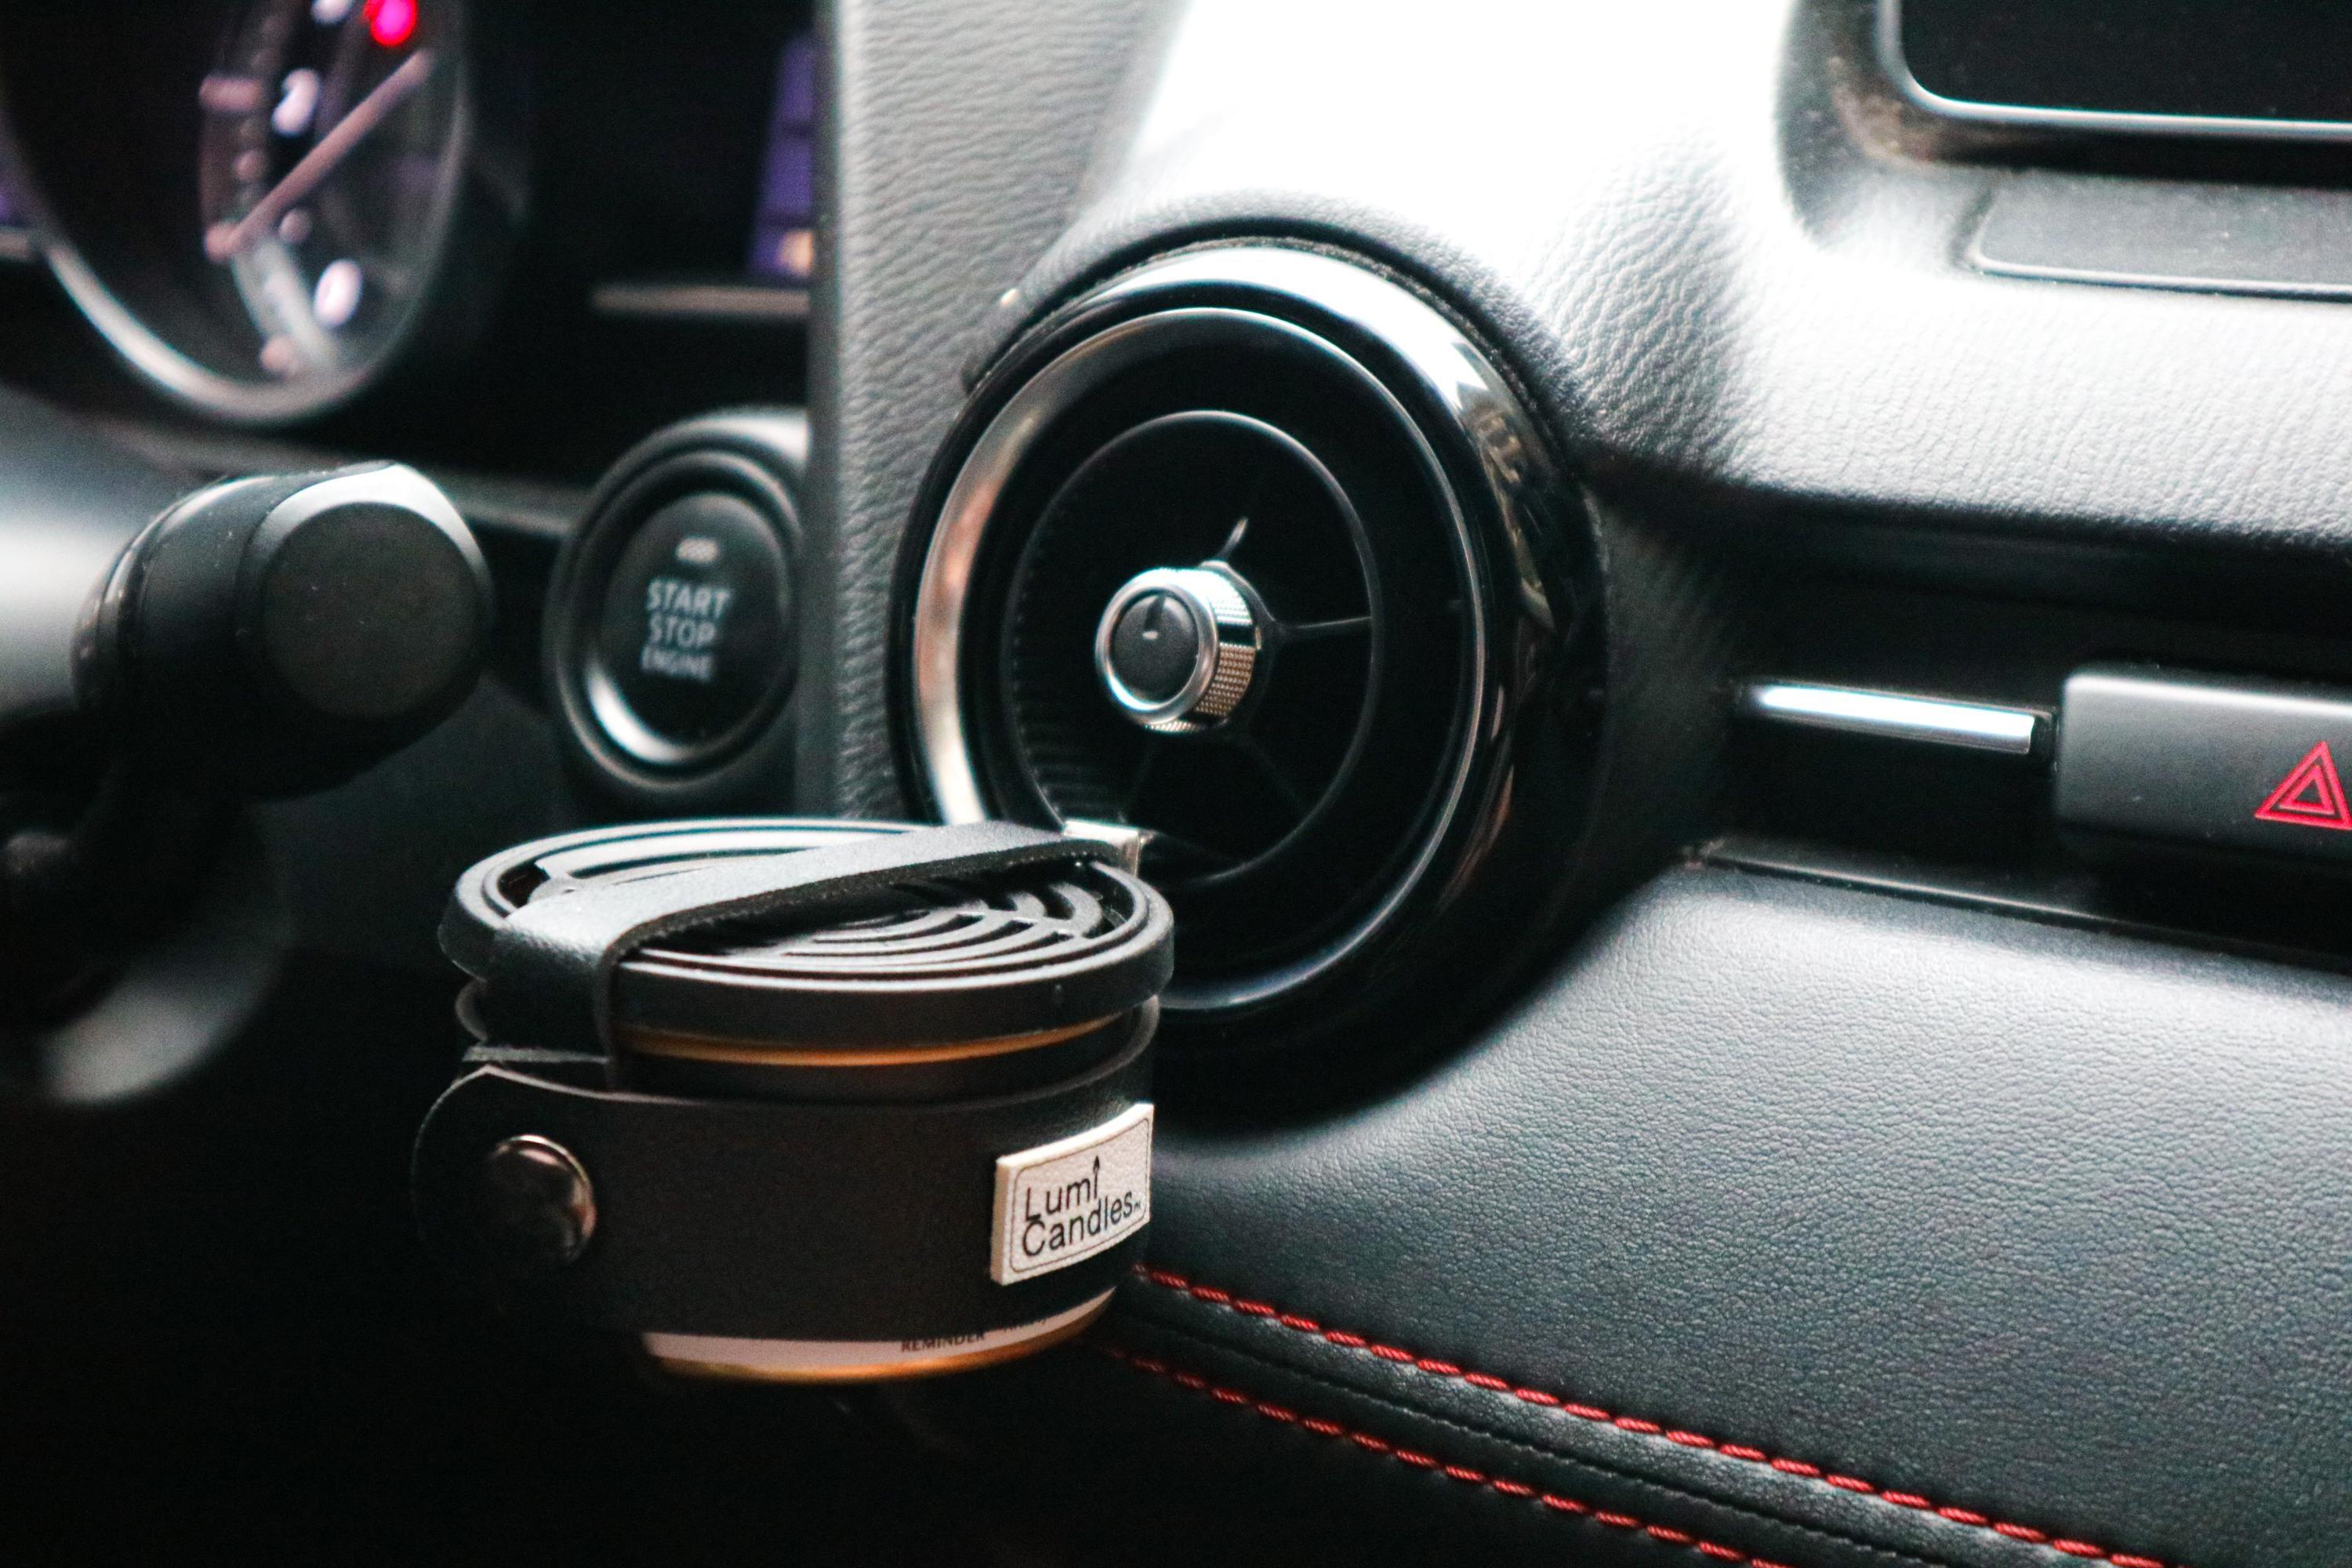 Black leather strap for car air freshener by LUMI Candles PH